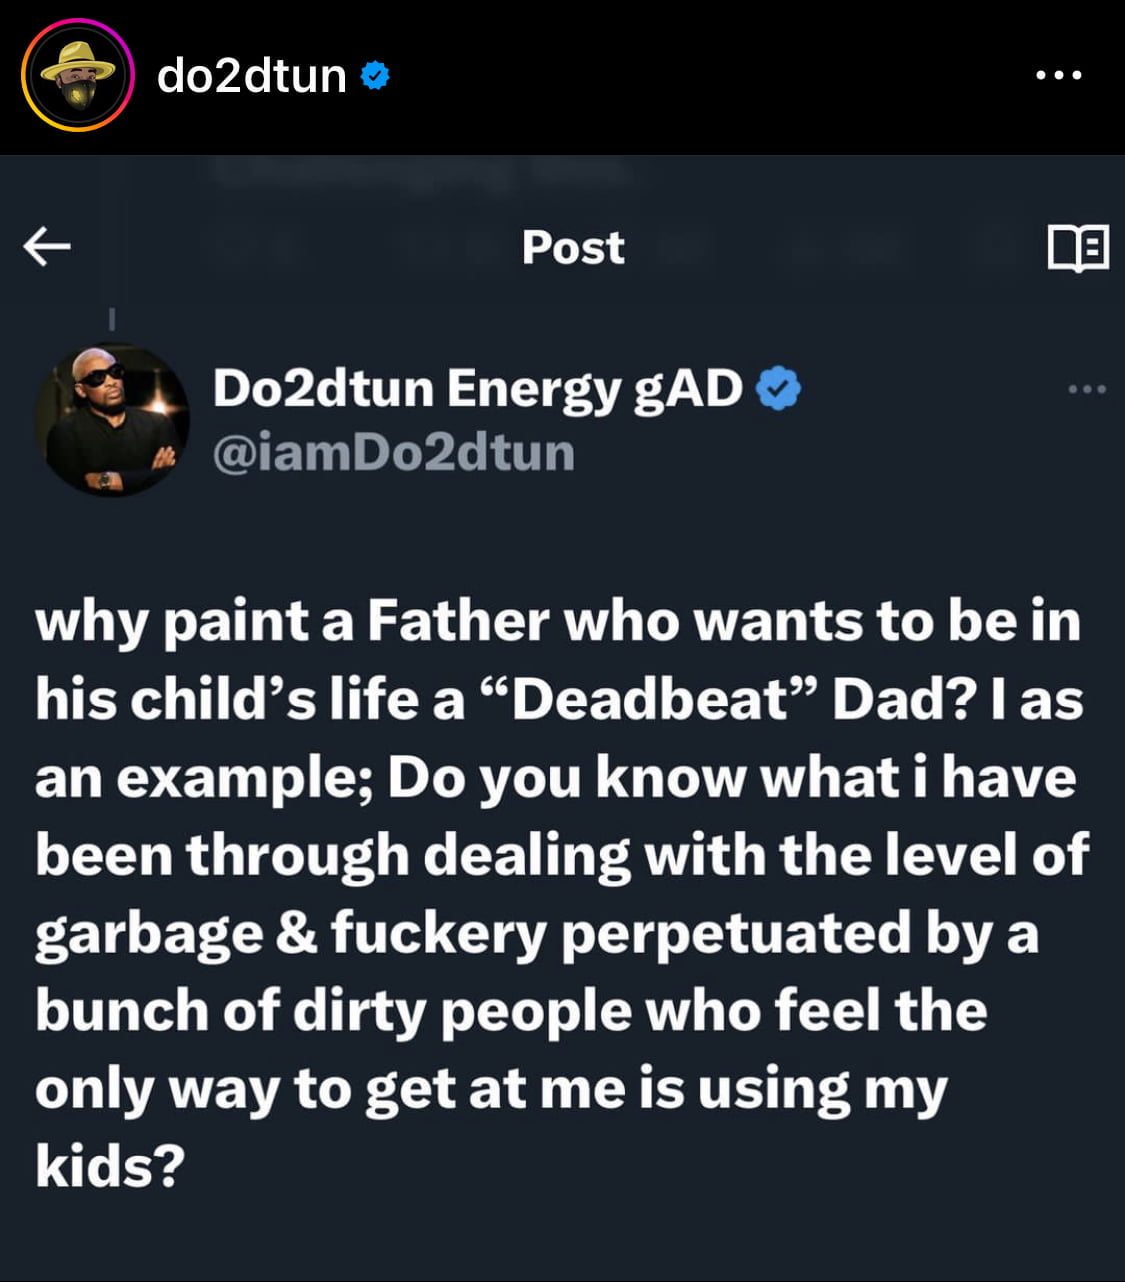 Do2dtun shares his dilemma in fighting for custody of his kids